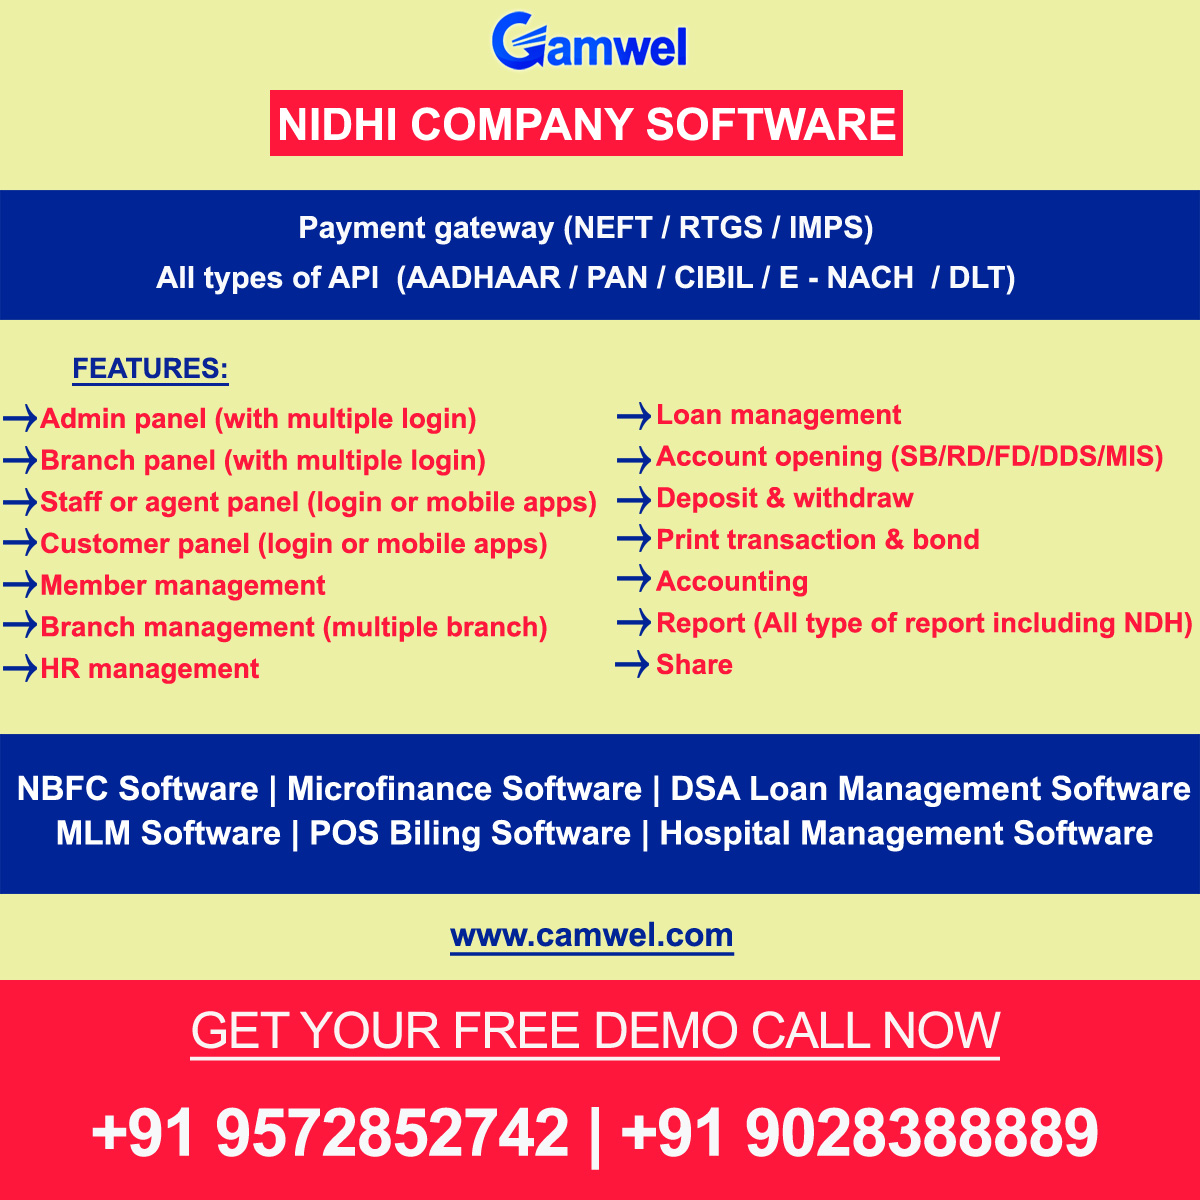 Best Nidhi Company Software in Patna. - photo